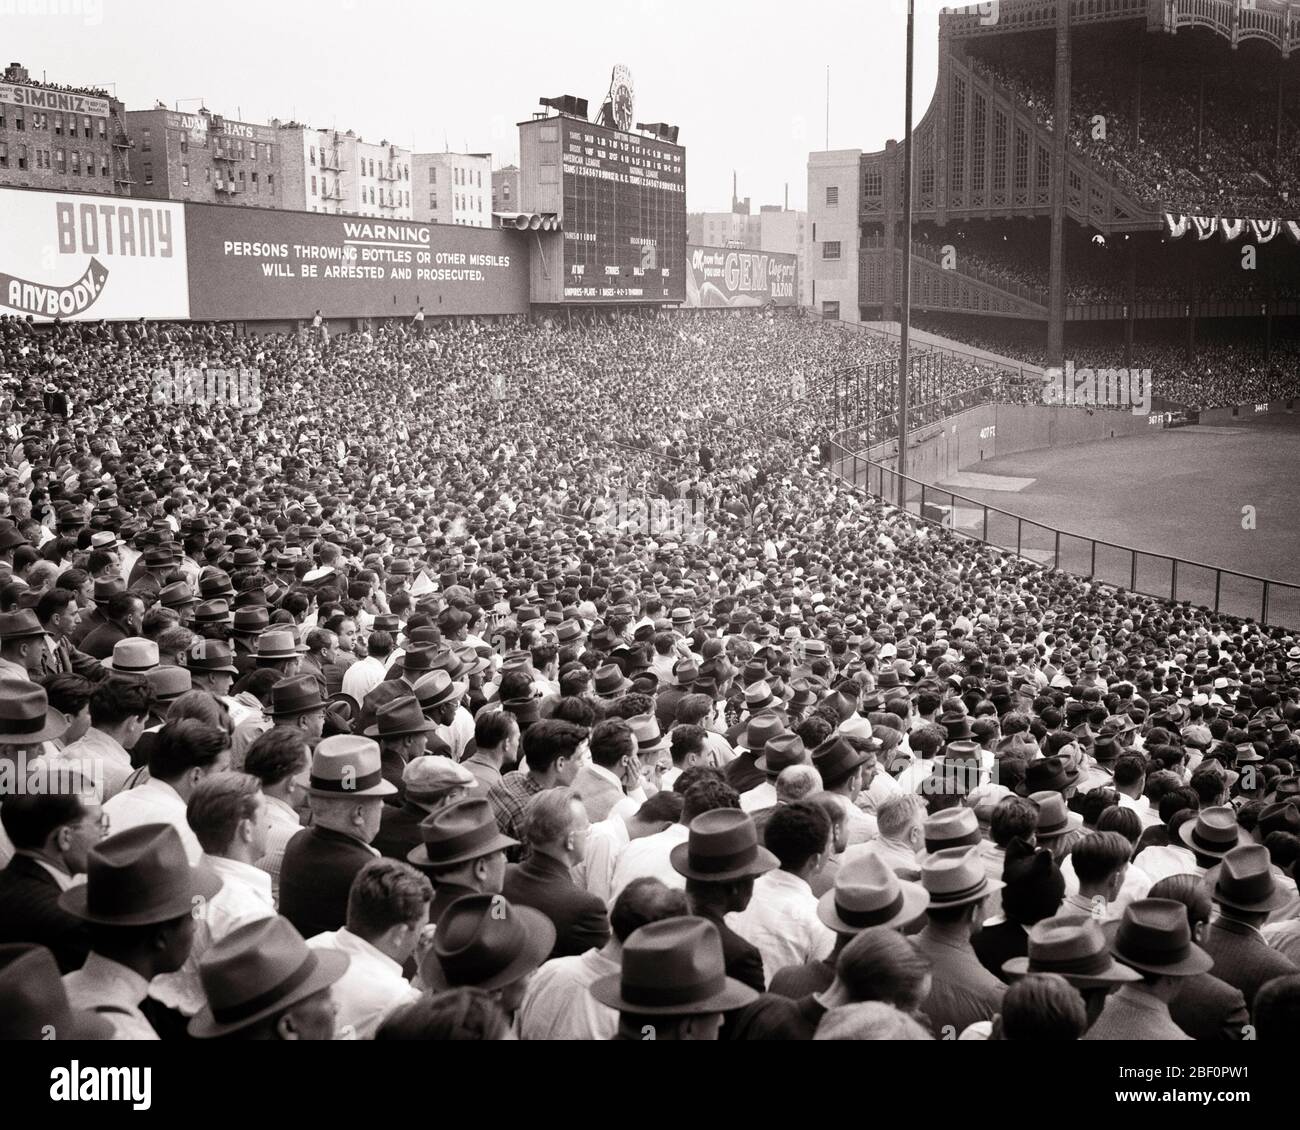 1940s OCTOBER 1 1941 CROWD IN BLEACHERS WORLD SERIES BASEBALL GAME DODGERS VS YANKEES SUBWAY SERIES YANKEE STADIUM BRONX NYC USA - q41476 CPC001 HARS NORTH AMERICAN HIGH ANGLE PRIDE IN BUNTING NYC PROFESSIONAL SPORTS SUBWAY NEW YORK VS BLEACHERS CITIES DODGERS NEW YORK CITY CAPACITY OCTOBER YANKEE BALL GAME BALL SPORT BROOKLYN DODGERS COOPERATION FANS HUGE SERIES THRONG TOGETHERNESS VS. YANKEES 1941 ATTENDANCE BASEBALL BAT BLACK AND WHITE CHAMPIONSHIP OLD FASHIONED YANKEE STADIUM Stock Photo